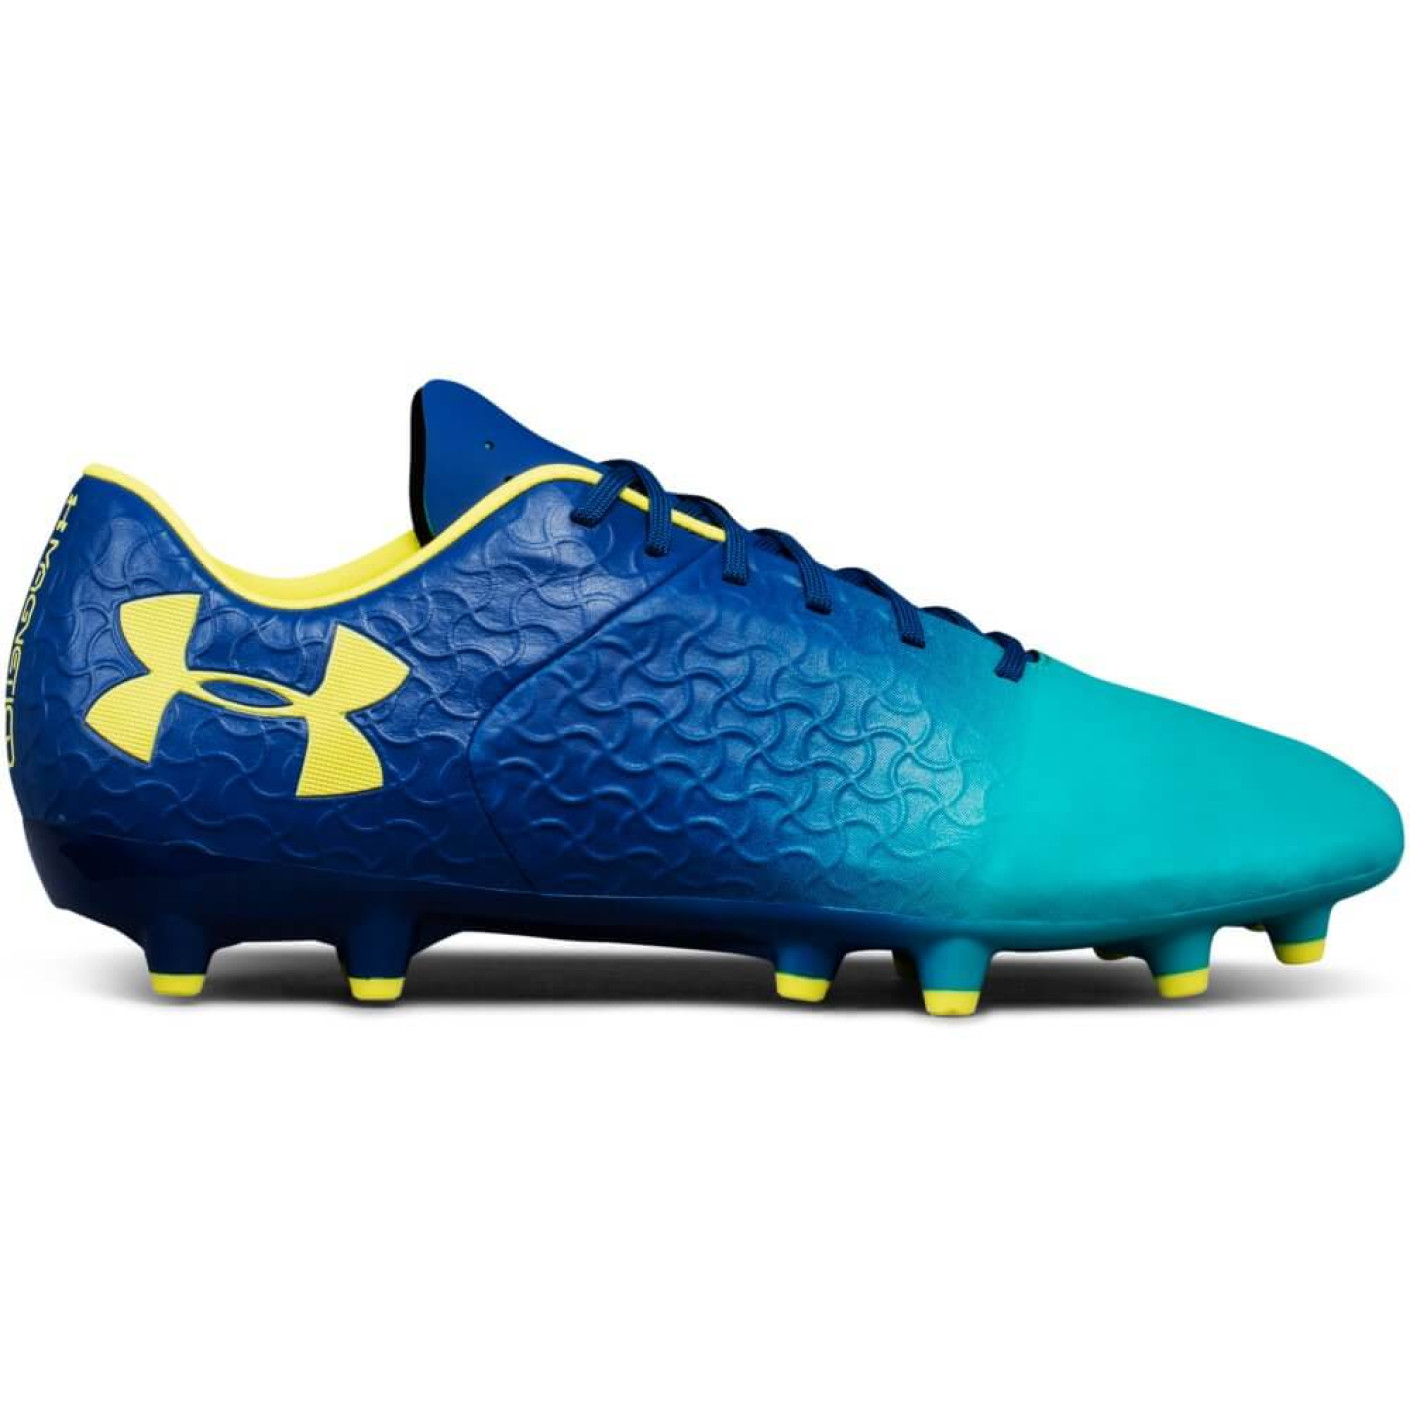 Under Armour Magnetico Premiere FG Green